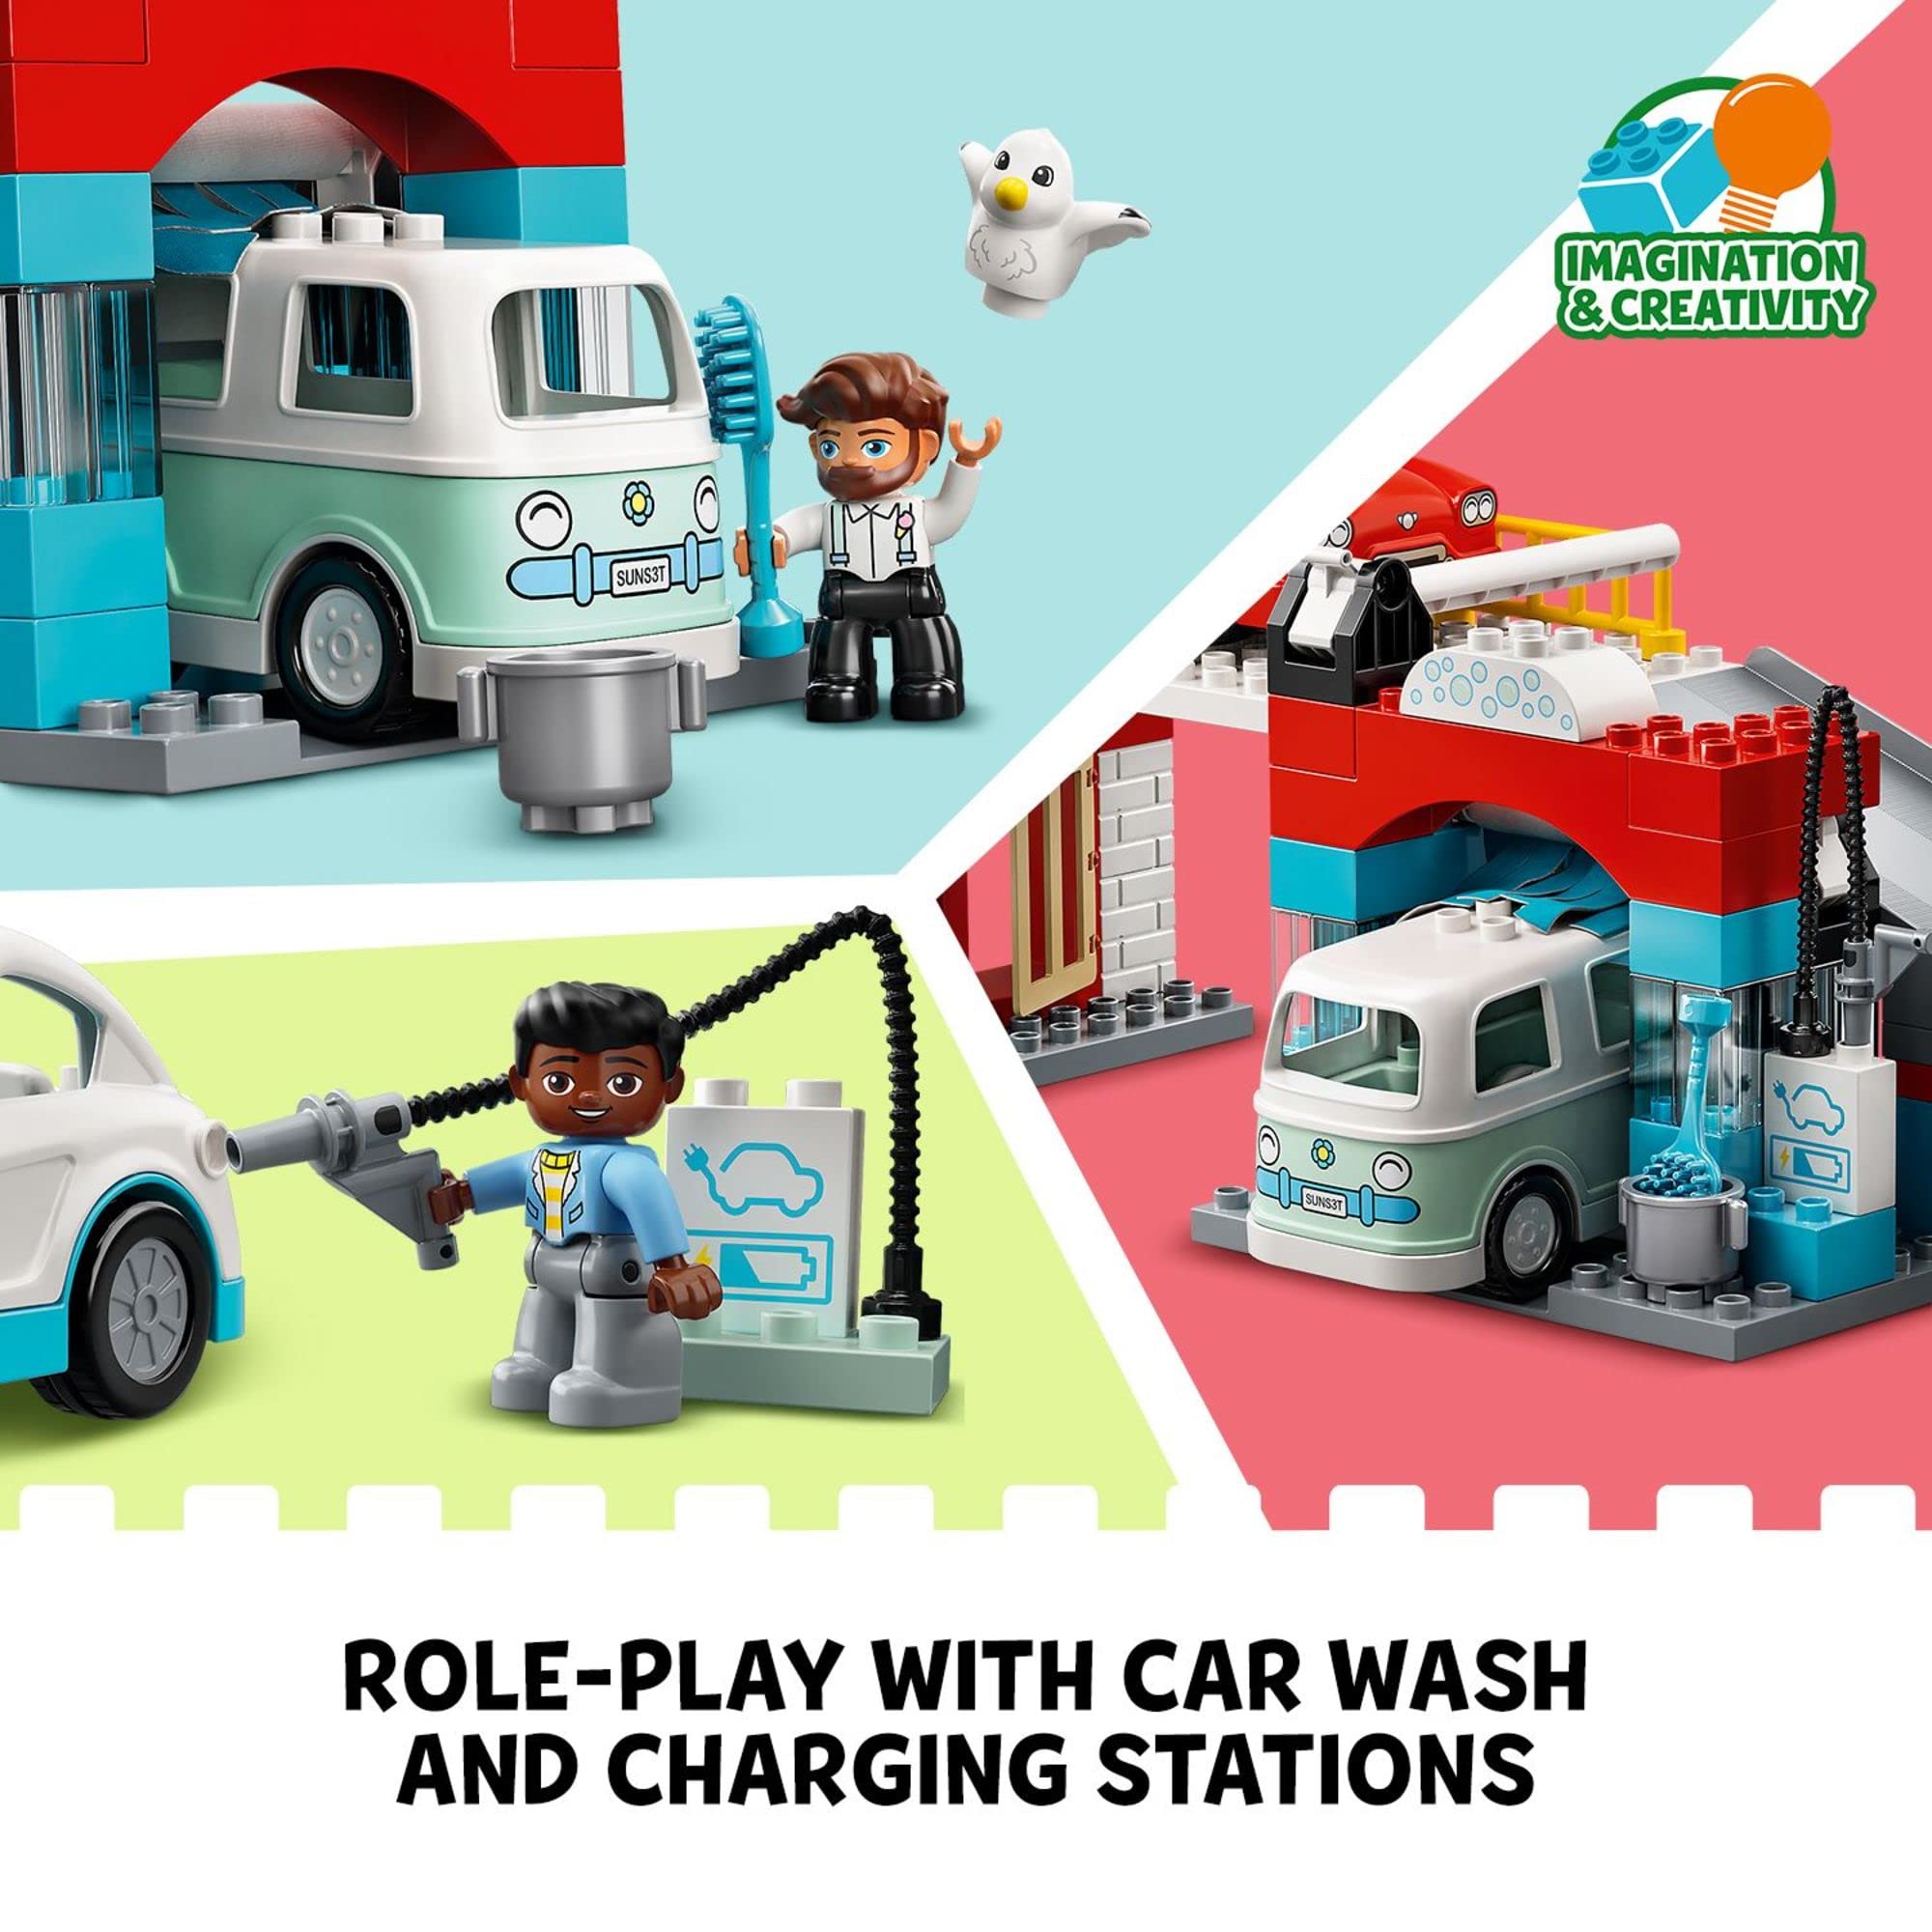 LEGO DUPLO Parking Garage and Car Wash Set 10948, Learning Toy for Toddlers with Garage, Gas Station & Toy Cars, Gifts for 2 Plus Year Old Boys & Girls